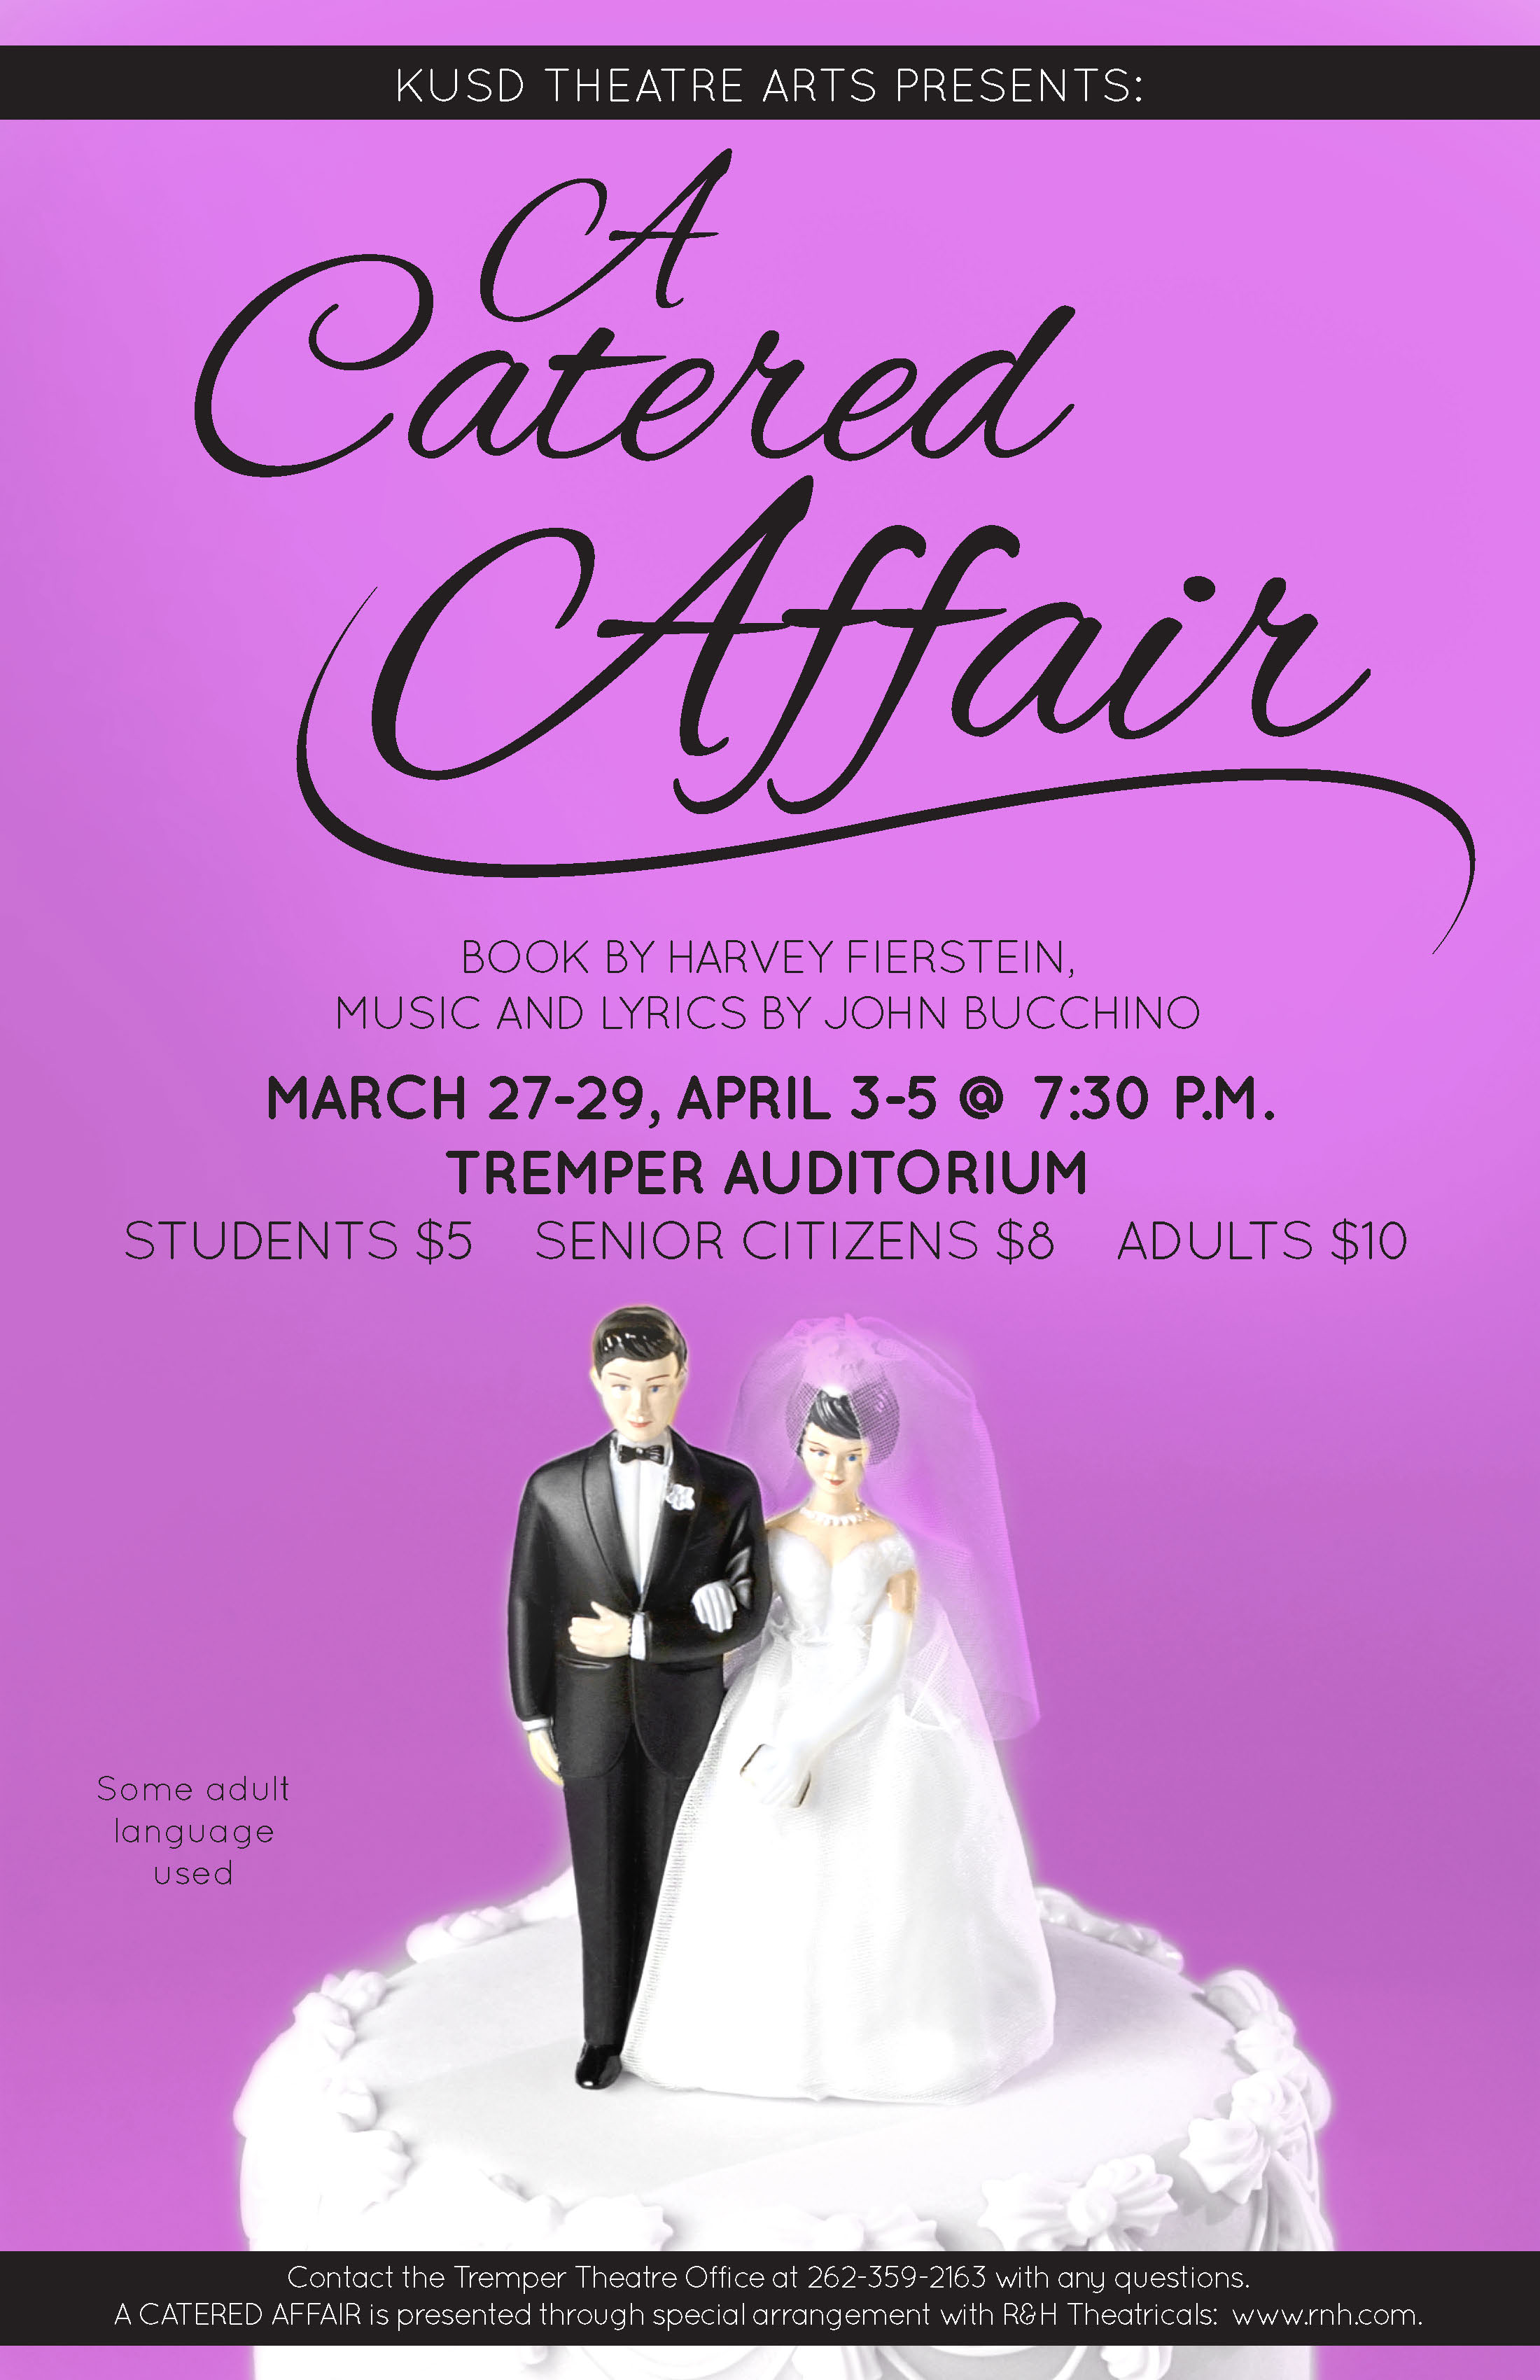 The poster for A Catered Affair